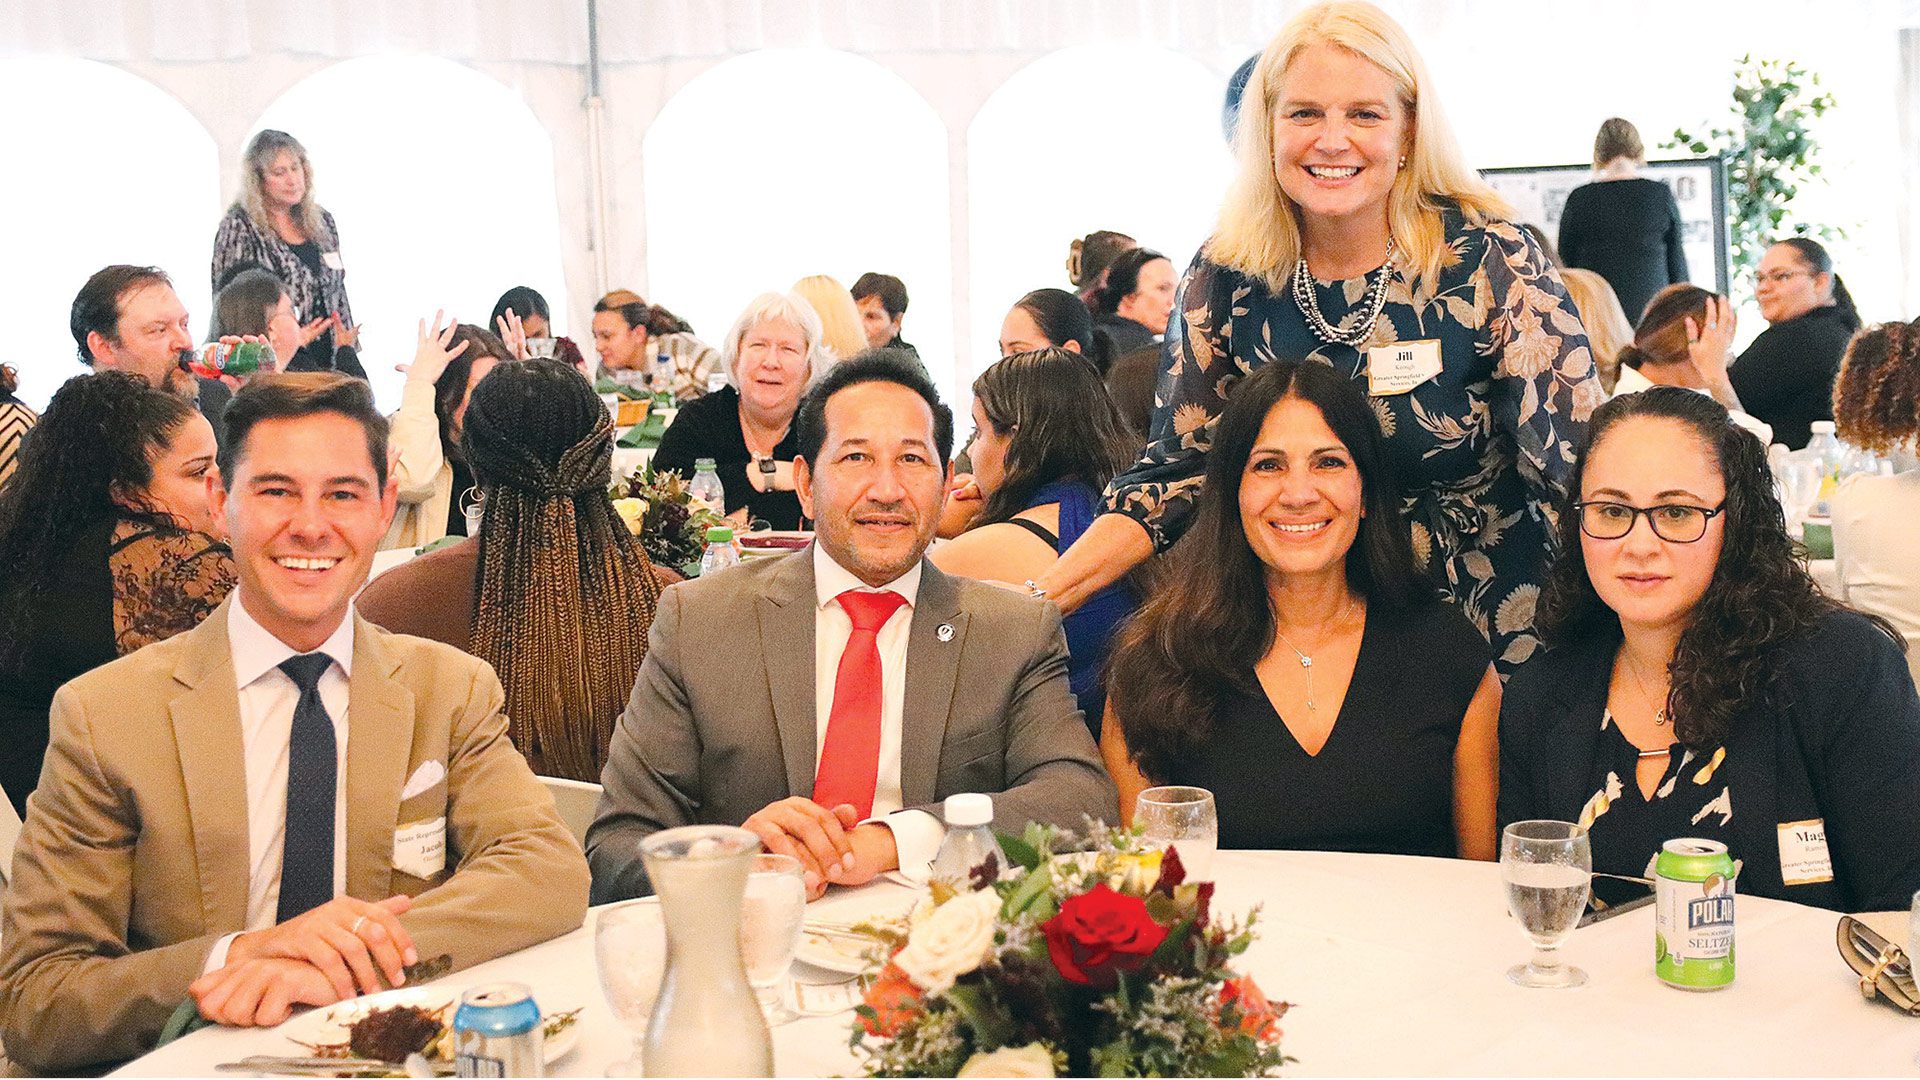 Pictured, from left: state Reps. Jacob Oliviera and Carlos Gonzalez, and GSSSI’s Nilsa Cintron, Keough, and Magy Ramos.